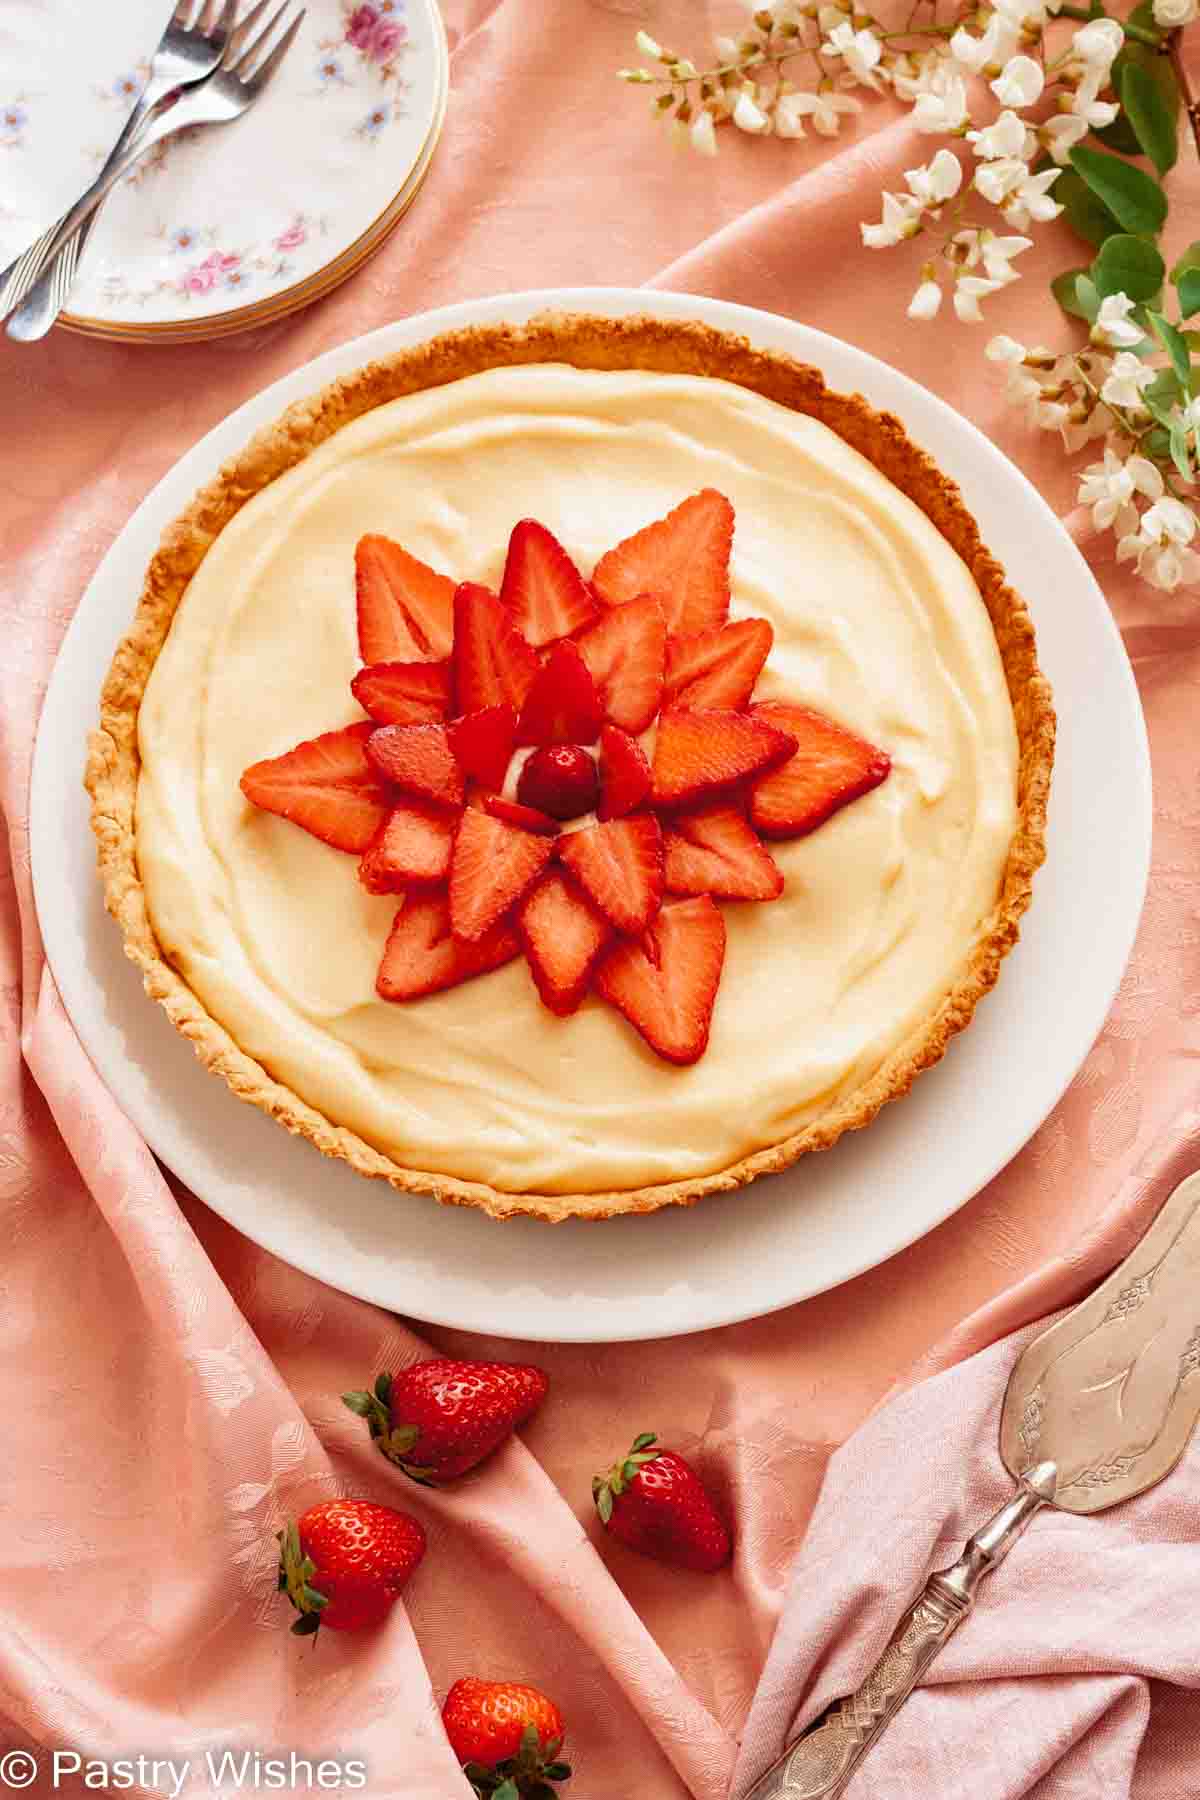 An overhead photo of a tarte aux fraises, French strawberry tart, on a pink tablecloth next to flowers and strawberries.